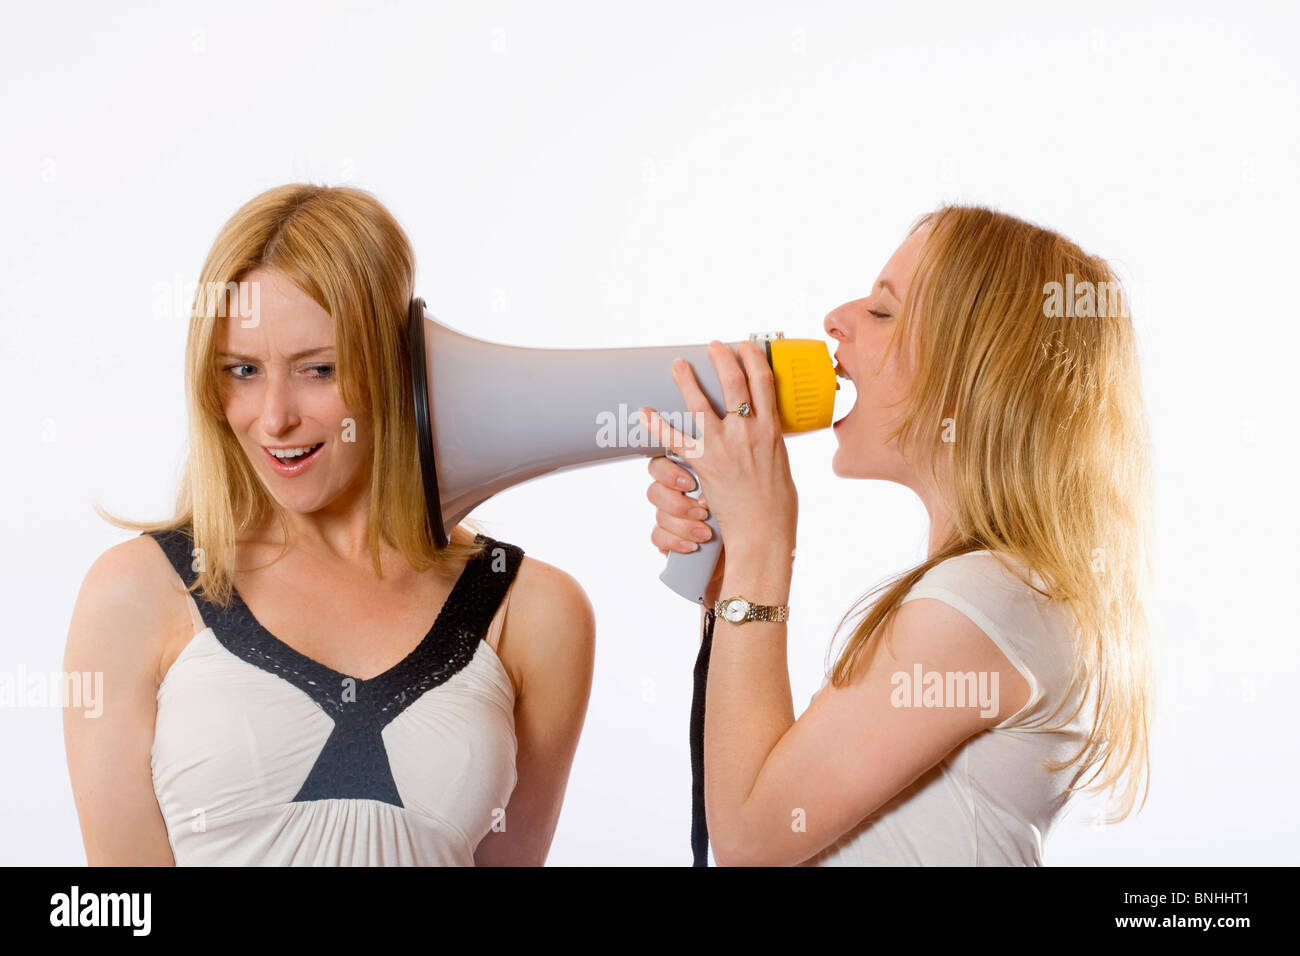 Twin Sisters Megaphone 20-30 years Acoustic Action Adult Adults Background Blond hair Bossy Communicate Communication Control Stock Photo